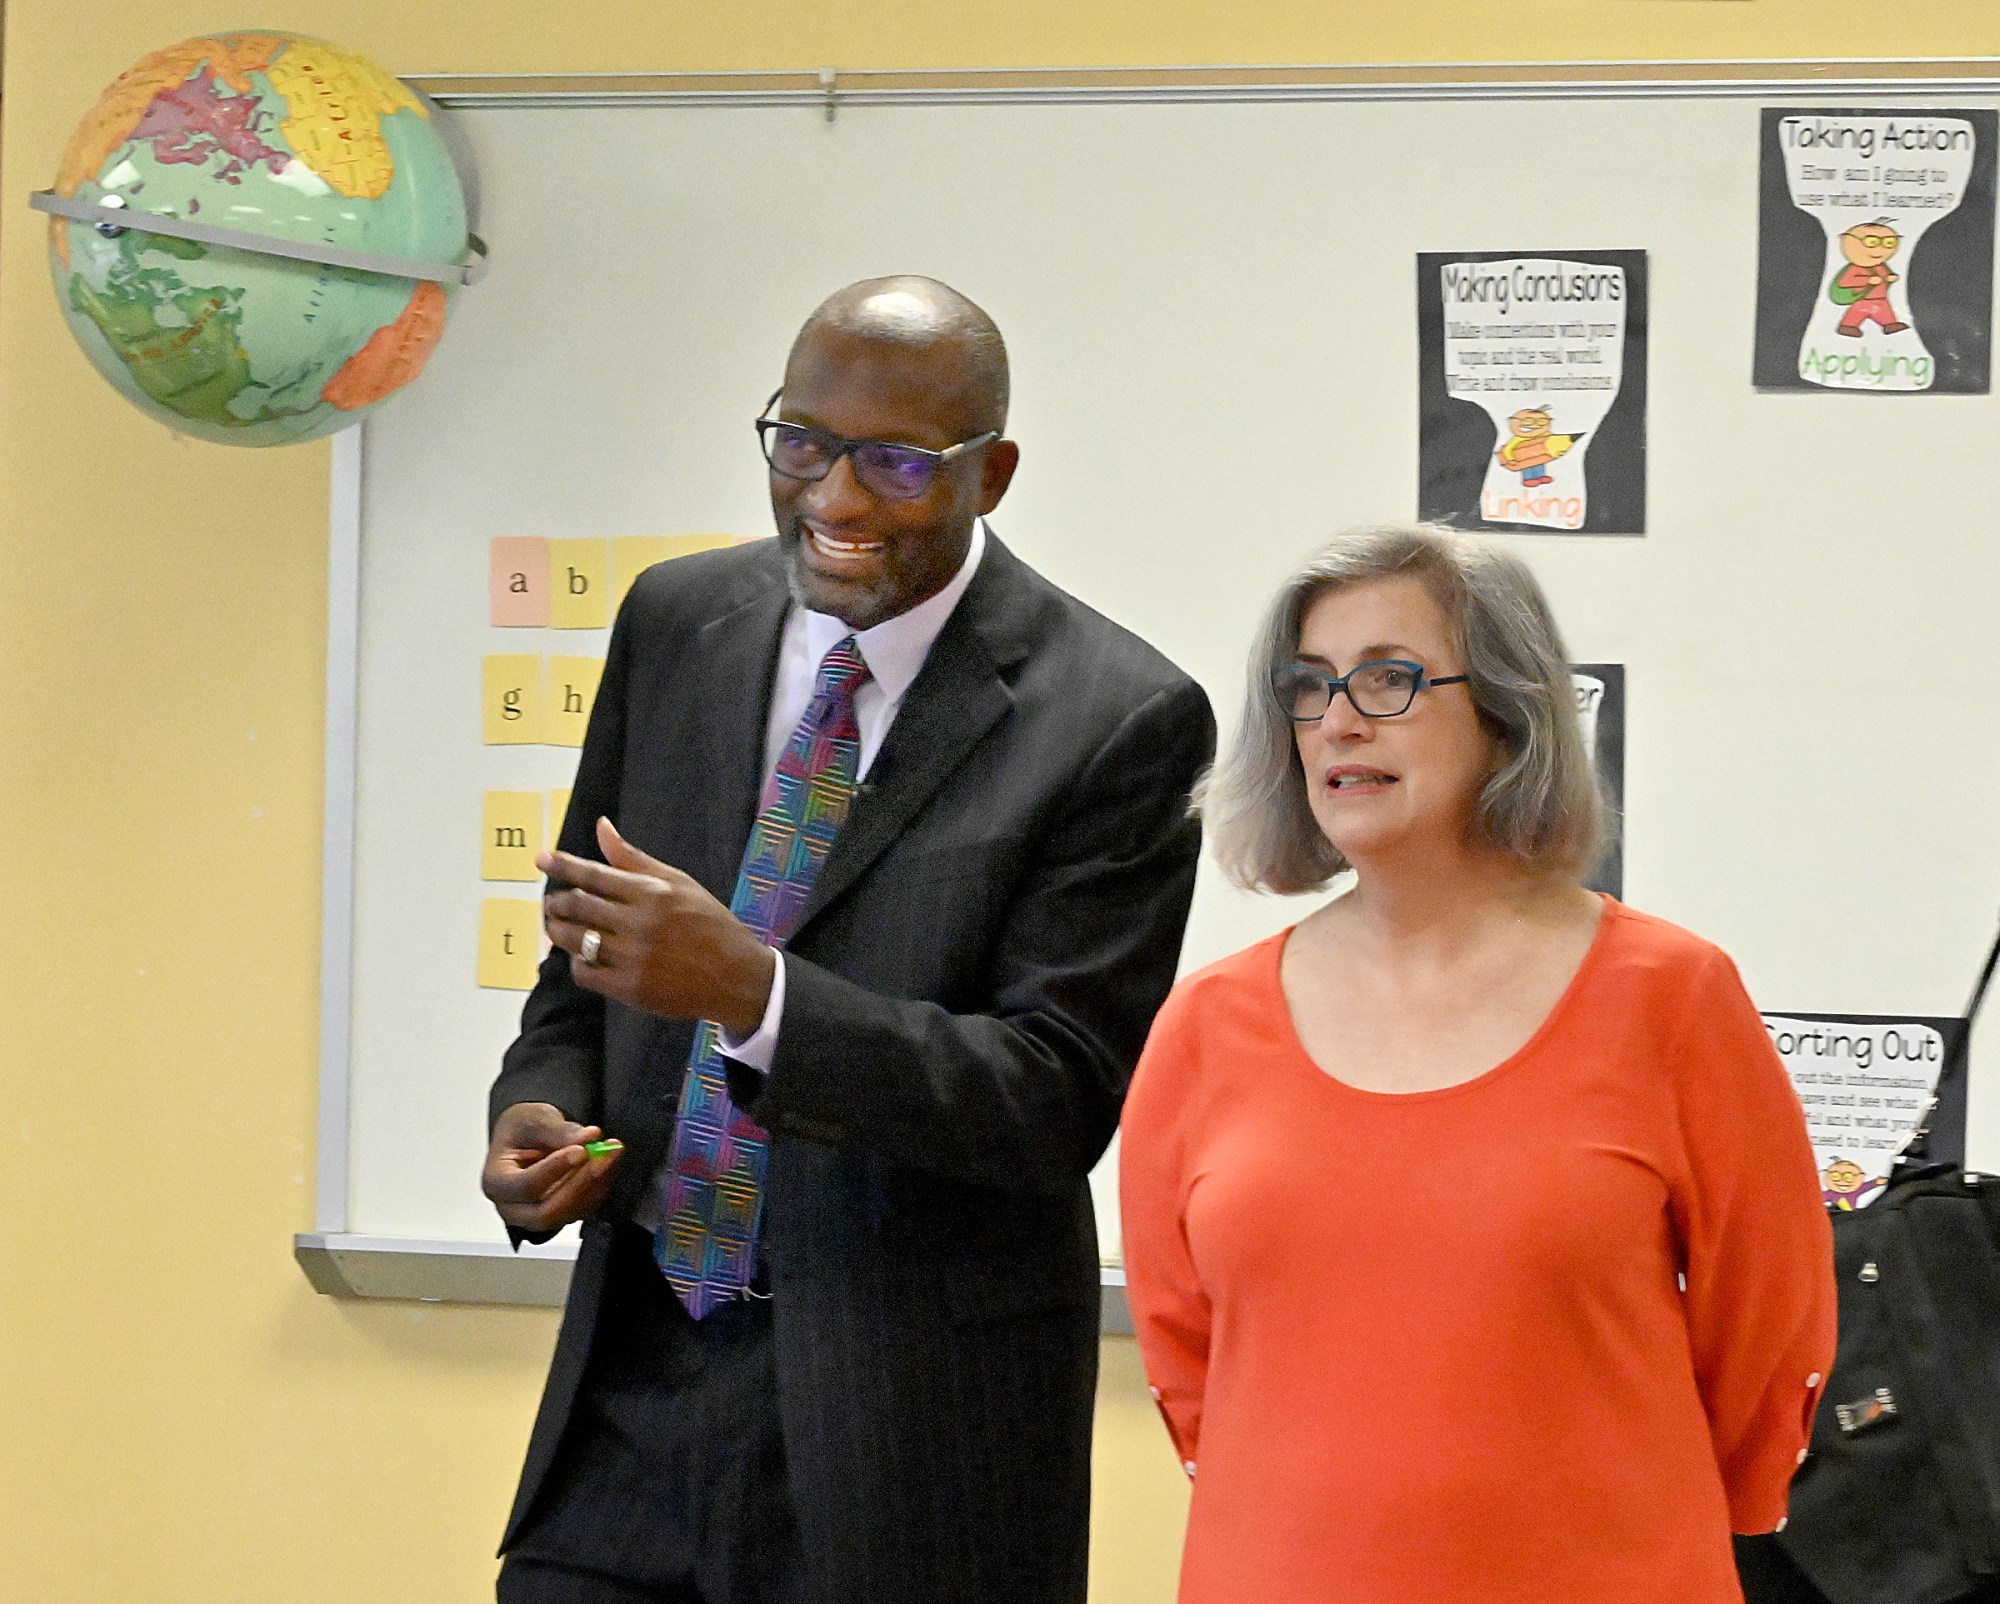 Dr. Mark T. Bedell, PhD., Superintendent of Anne Arundel County Public Schools, and Joanna Bache Tobin, AACPS Board of Education President, visit Ms. Freye's classroom at Germantown Elementary School.